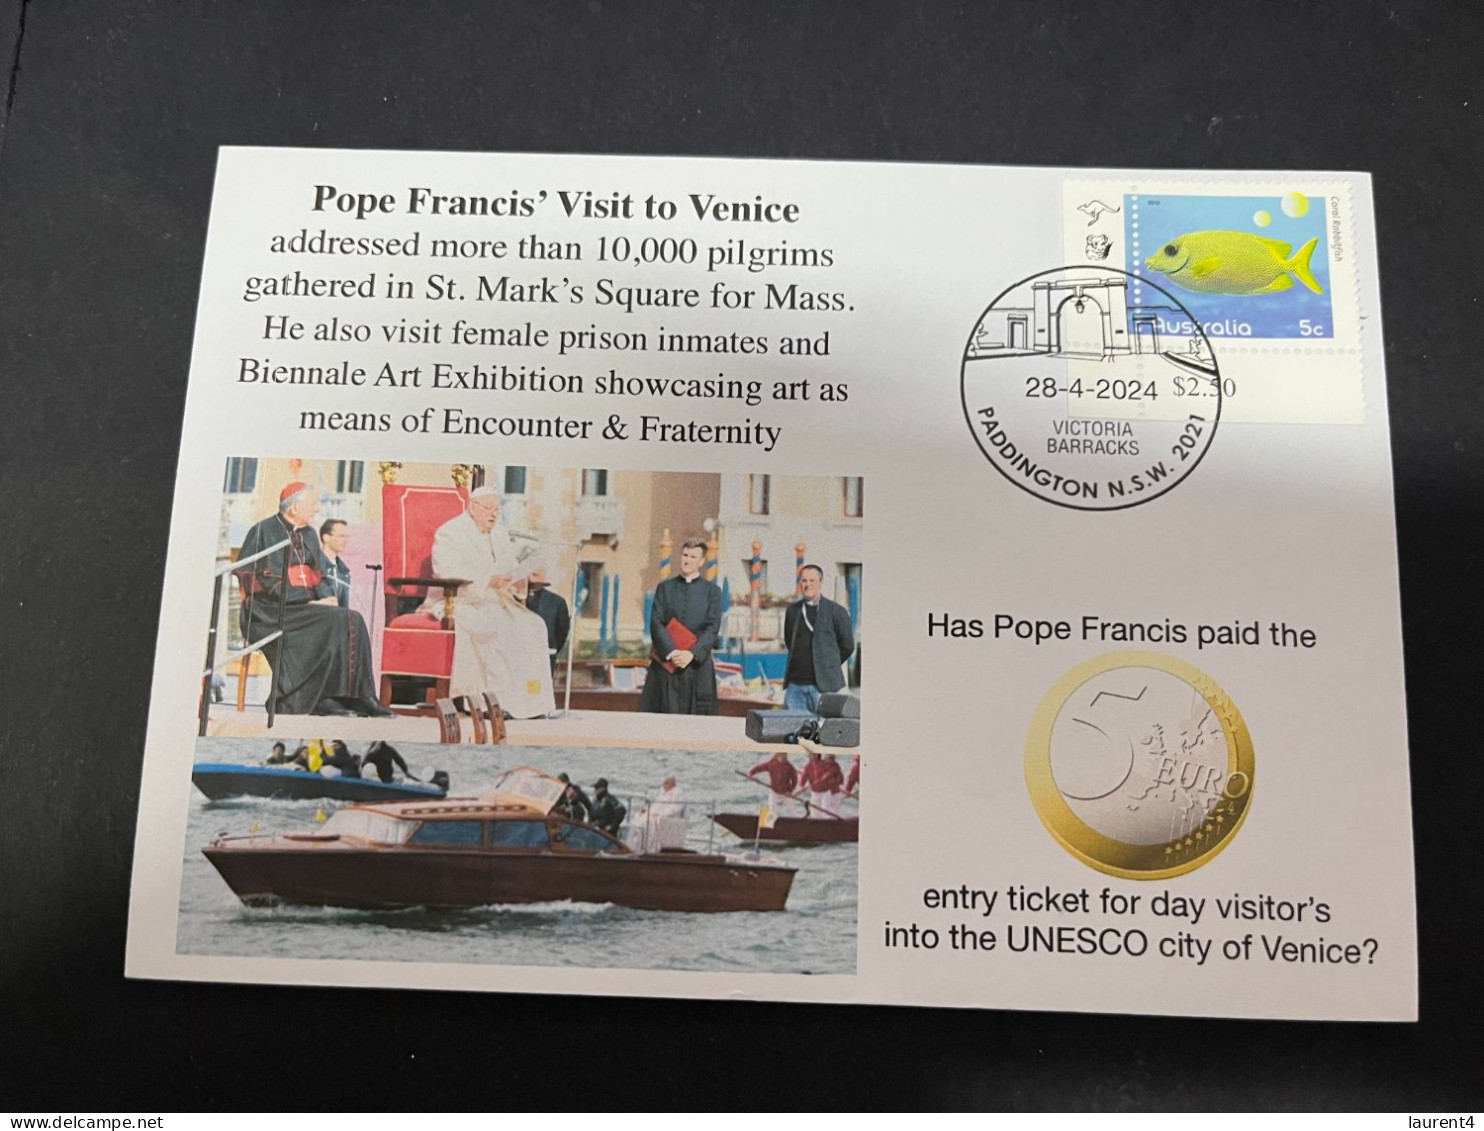 30-4-2024 (3 Z 26) Pope Francis Visit To Venice In Italy (28-4-2024) OZ Stamp (1 Cover) 5 Euro Visit Fee Paid ? - Christentum